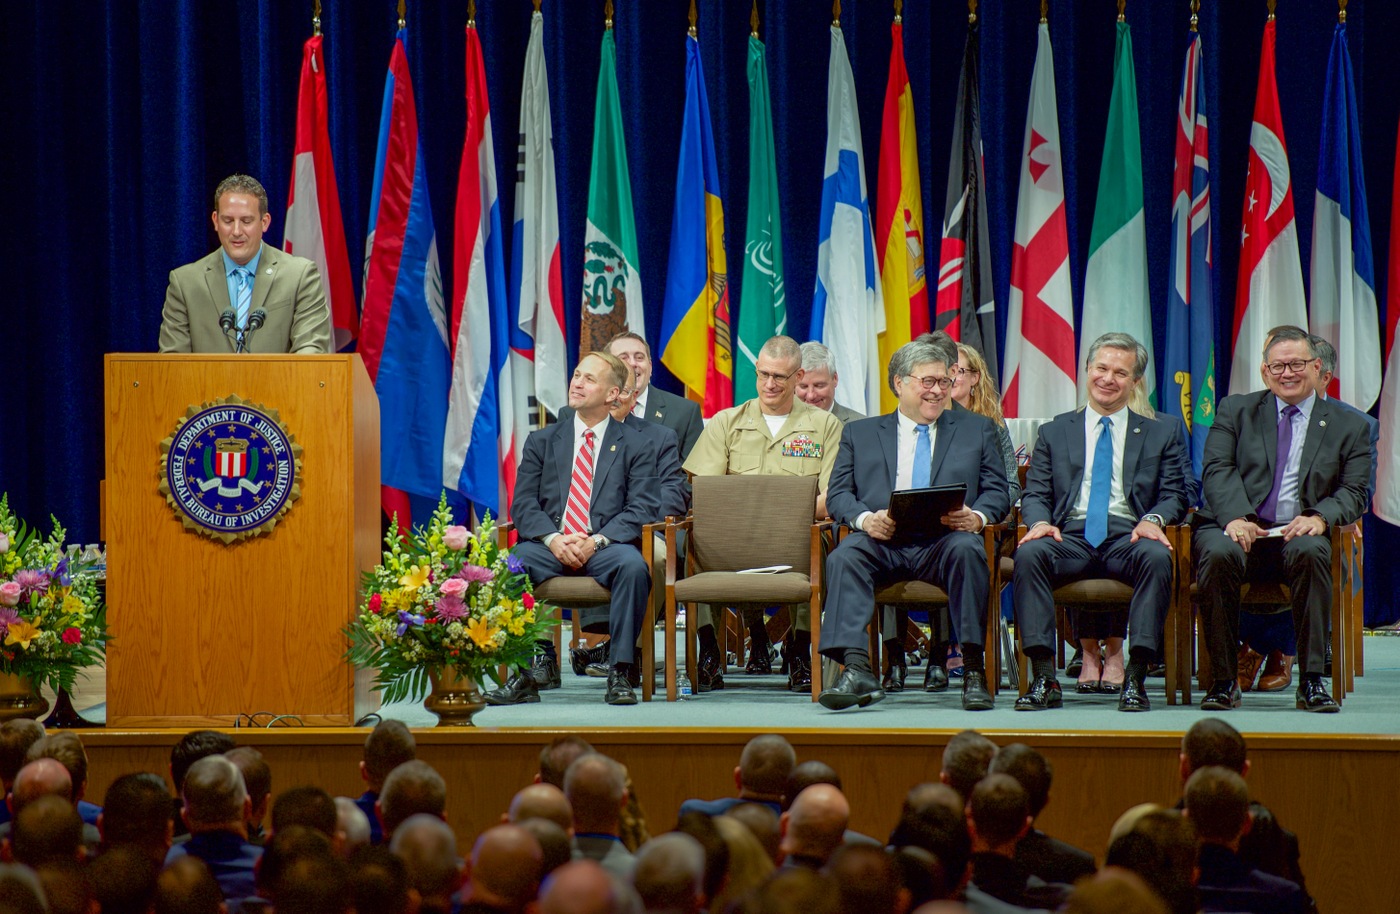 Class Speaker Brian J. Issitt of the Phoenix Police Department speakers during National Academy graduation ceremony at the FBI Training Academy in Quantico, Virginia.